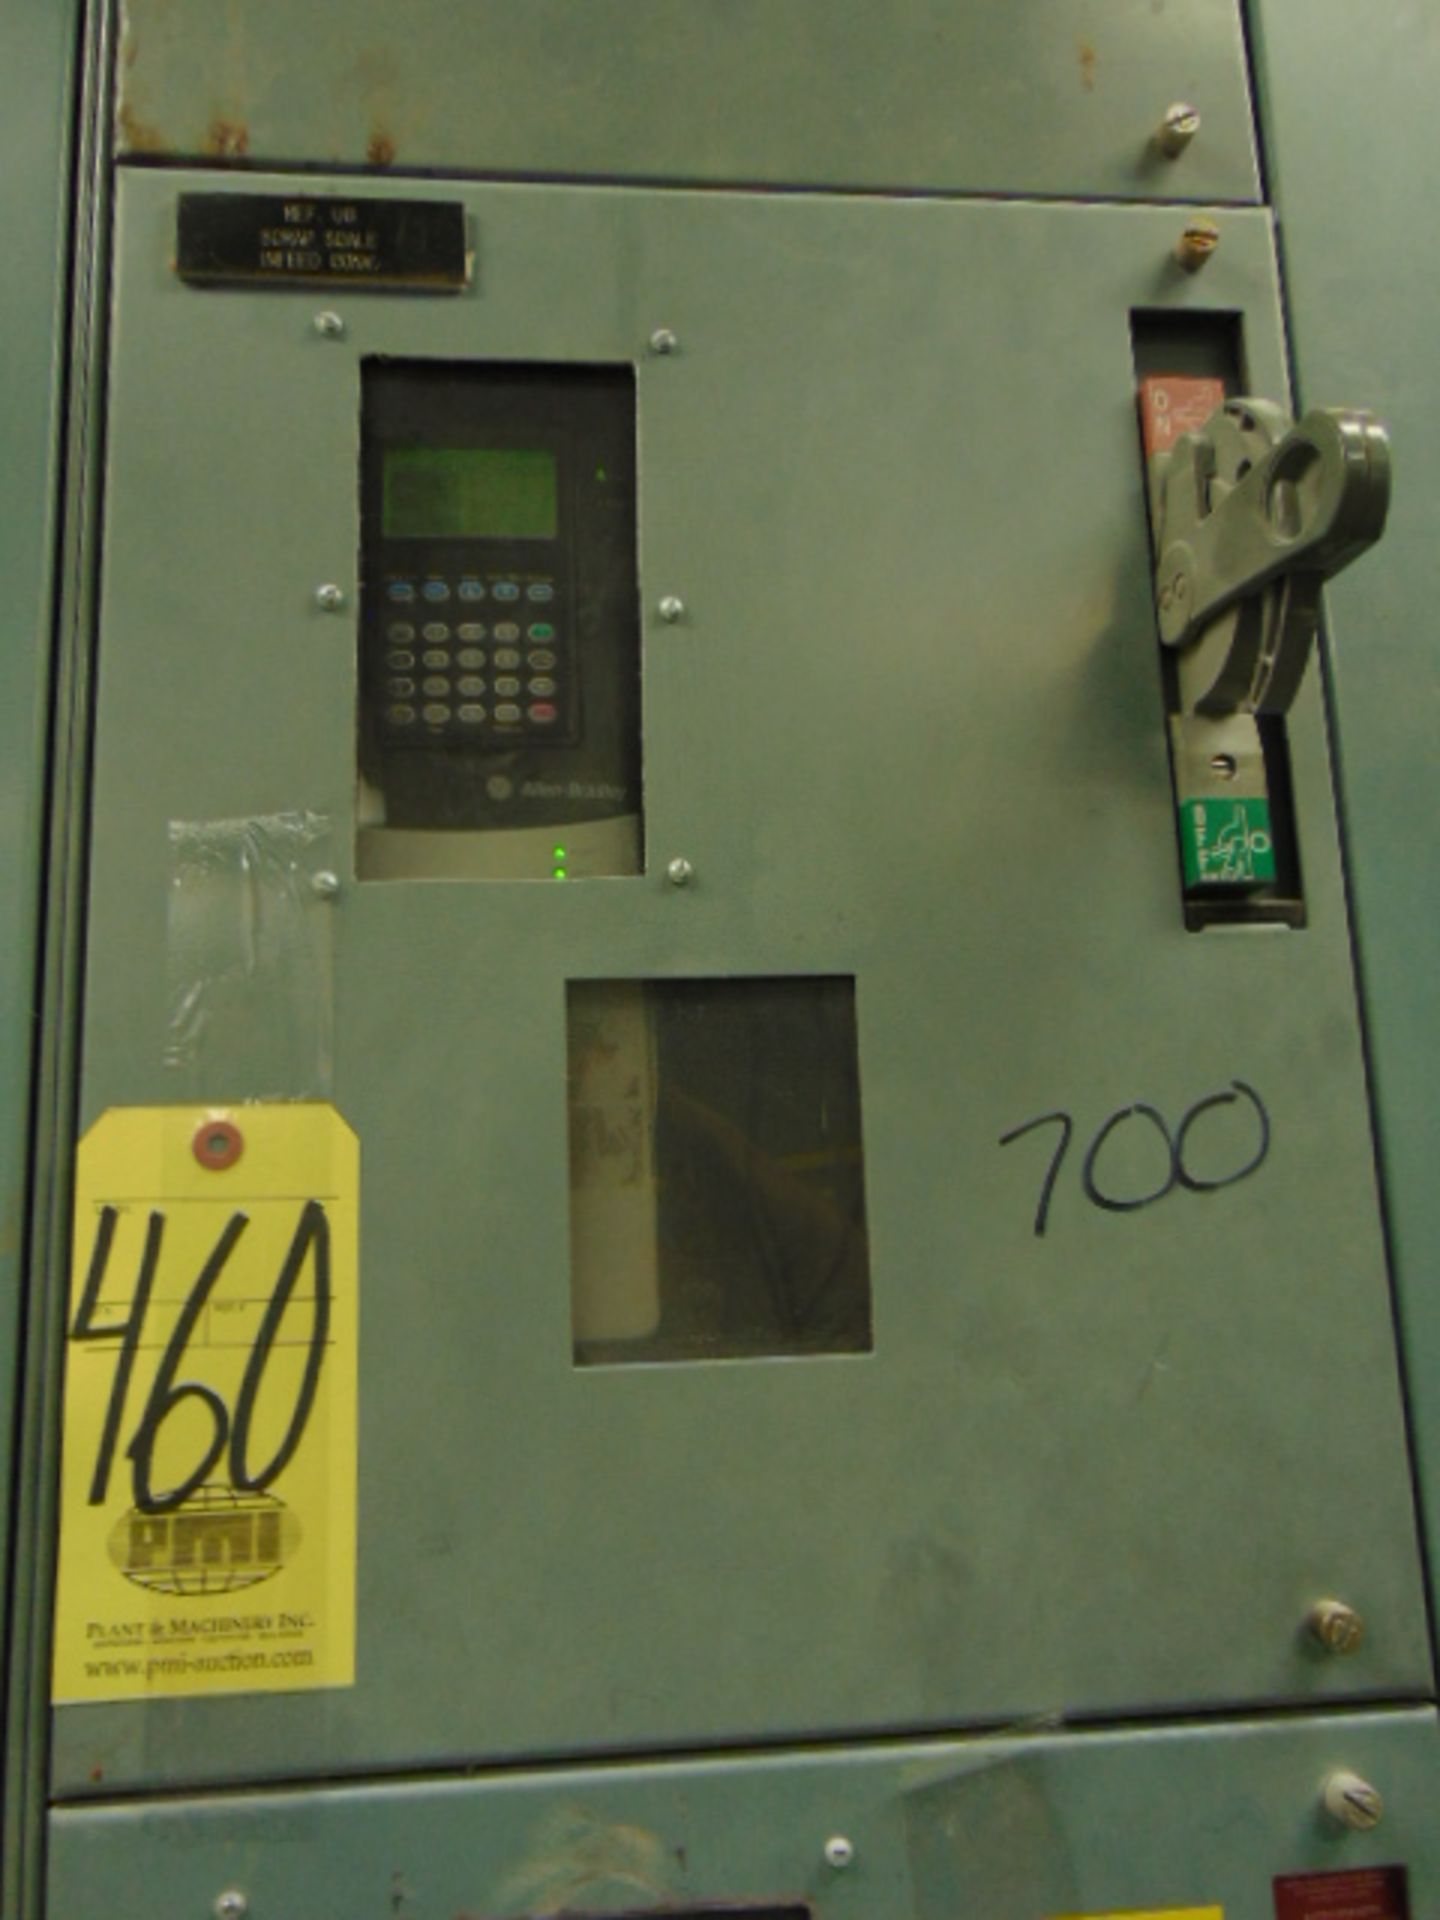 AC VARIABLE FREQUENCY DRIVE, ALLEN BRADLEY POWERFLEX MDL. 700 (located on roof) (Note: has been